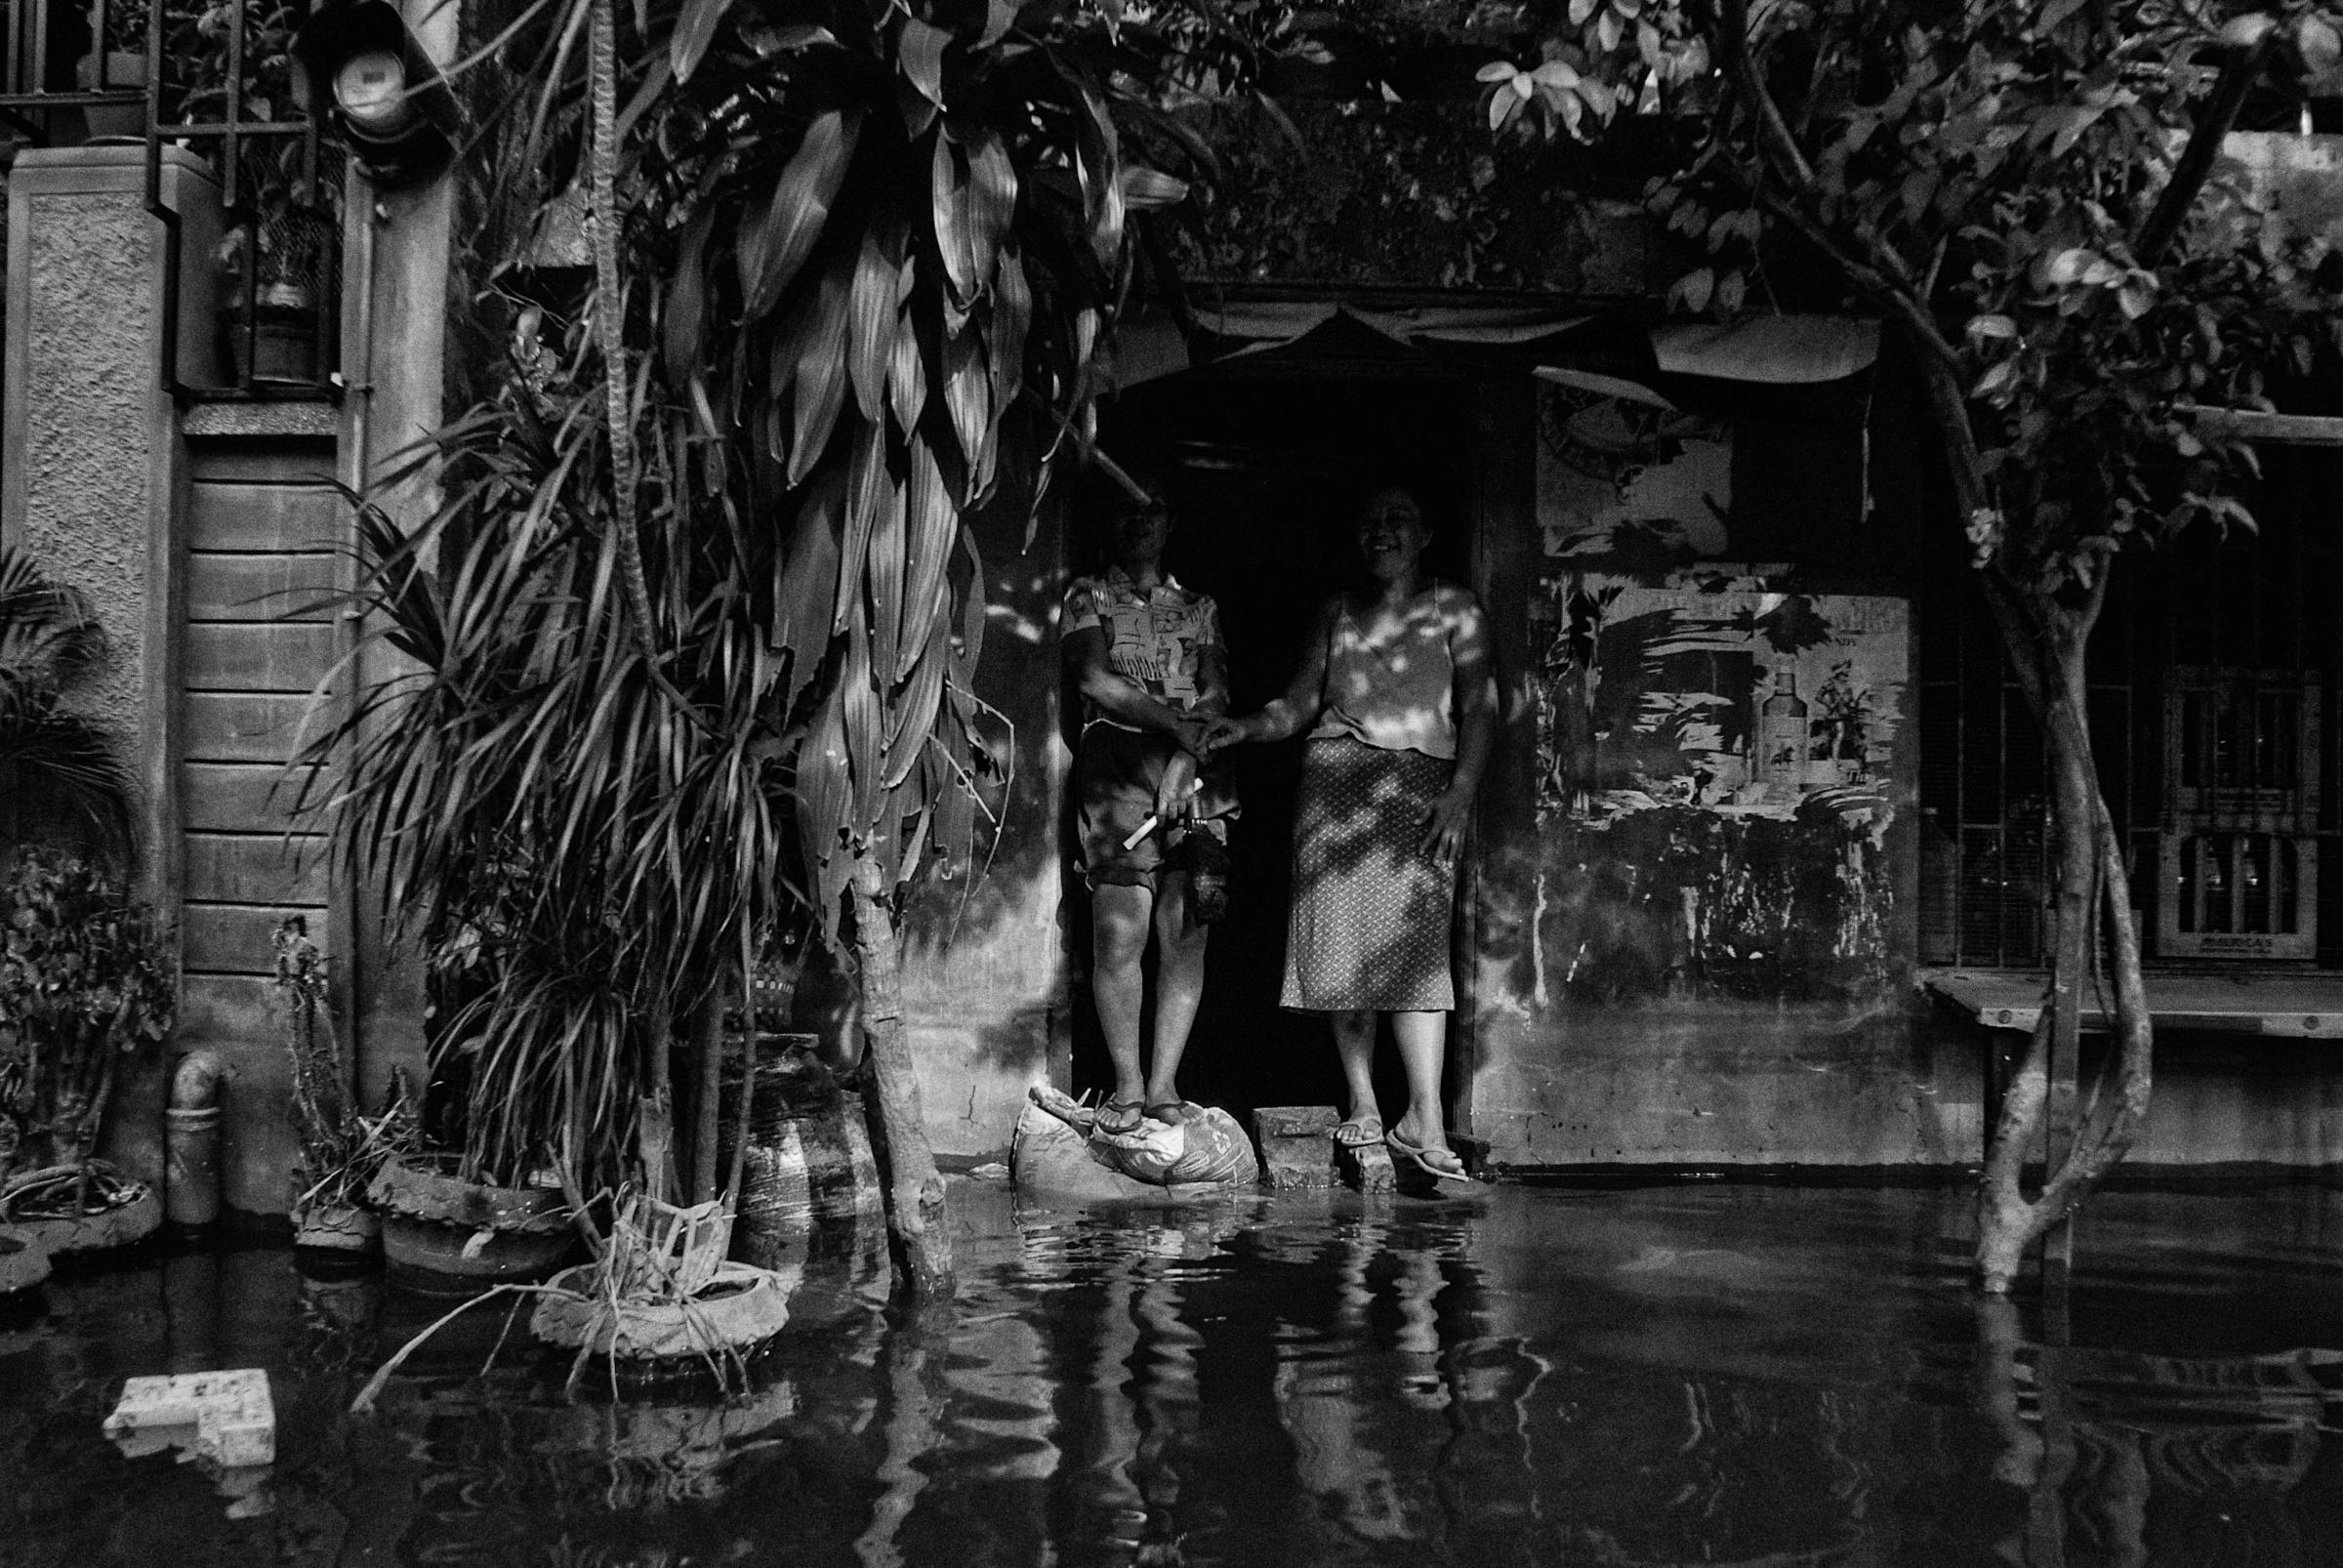 Residents wait for relief packs in Taguig city as floodwaters inundate their access to the town center on Oct. 10, 2009.